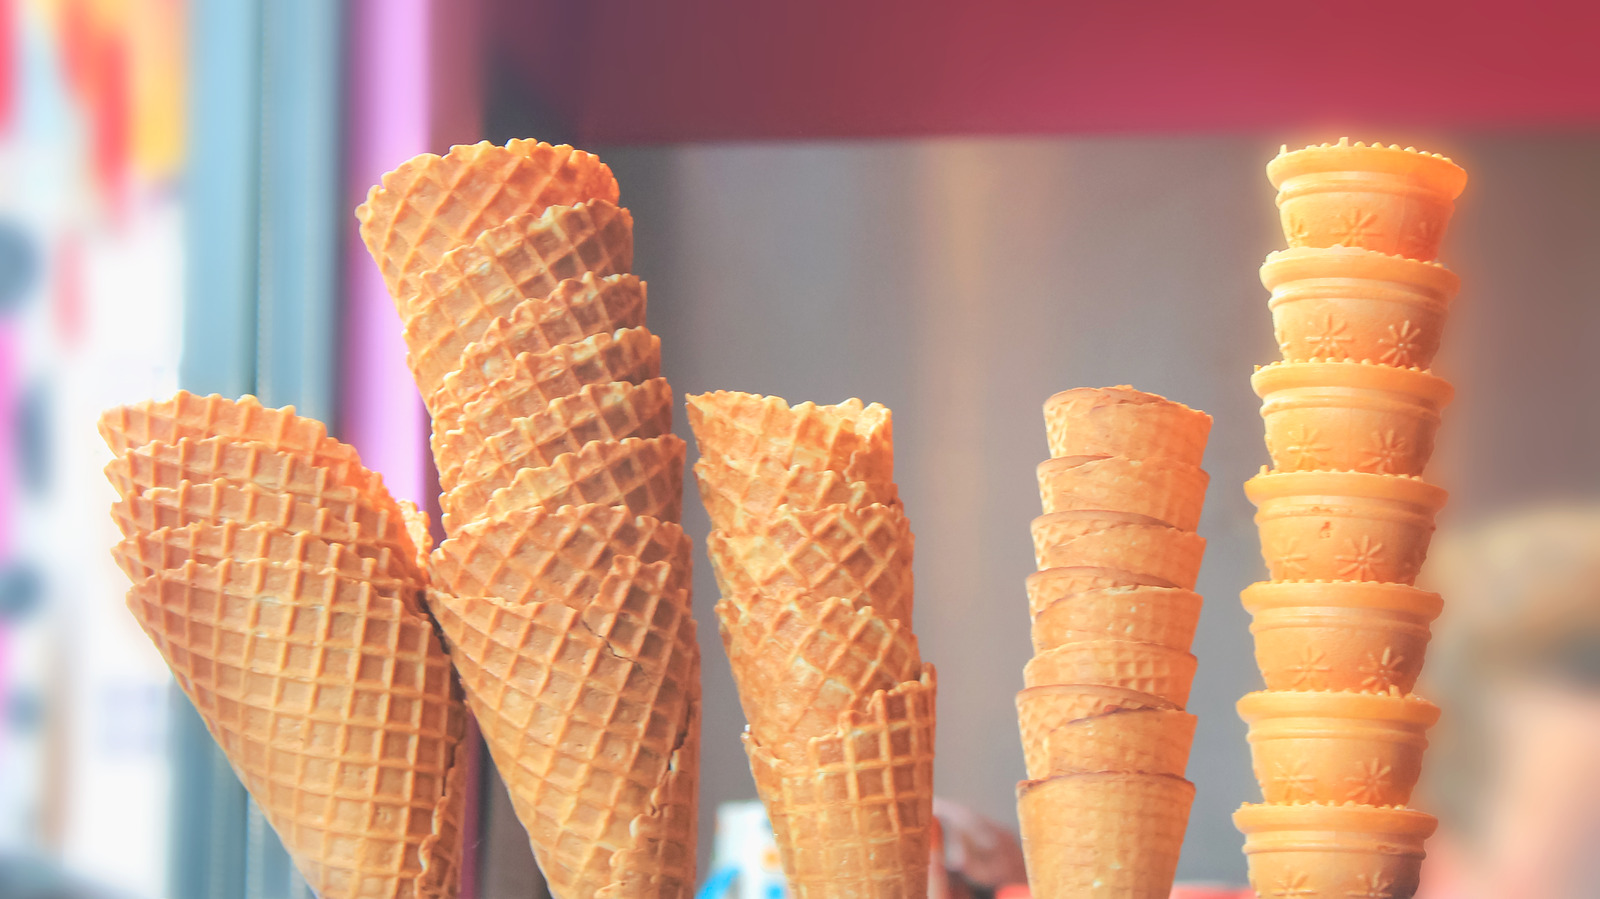 21 Cone-Shaped Food Dishes